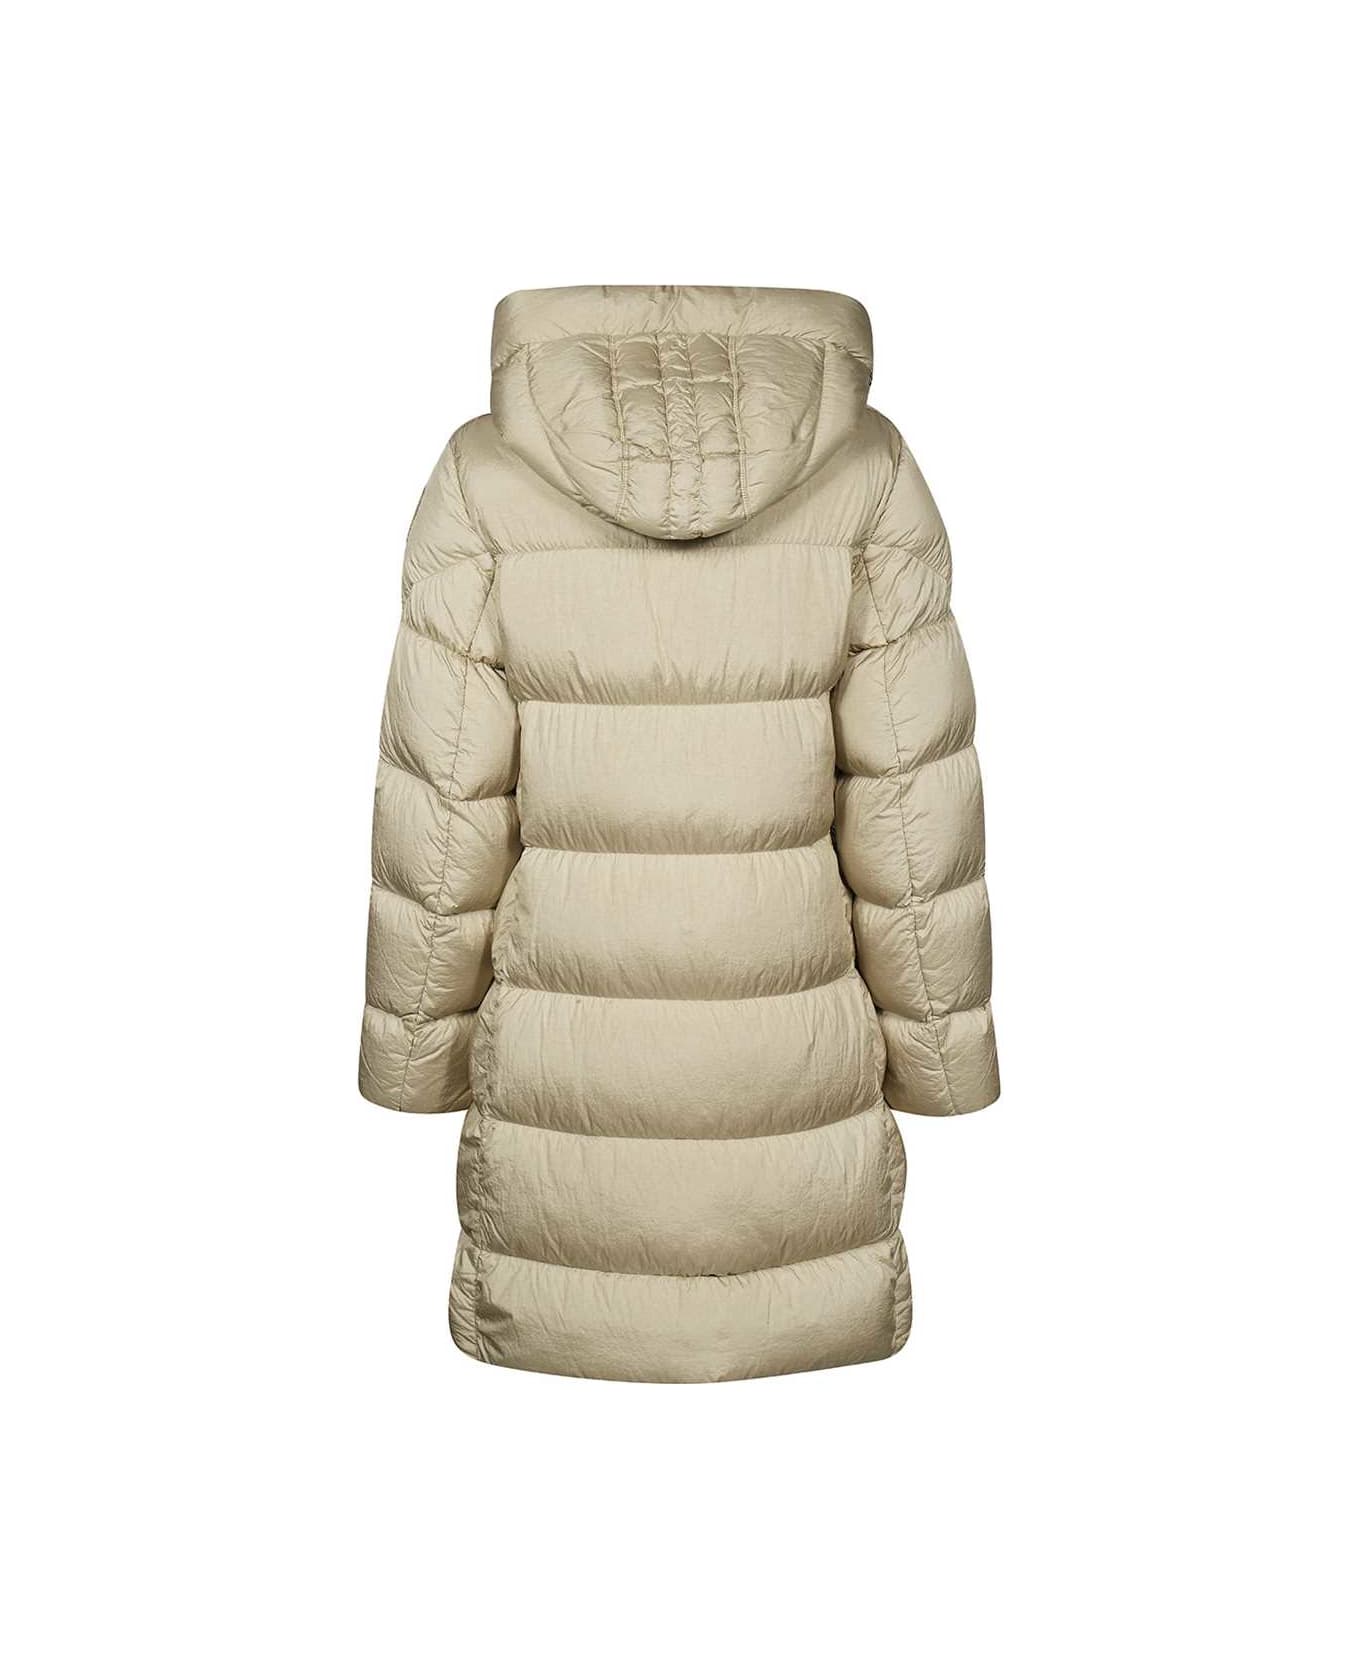 Parajumpers Harmony Long Hooded Down Jacket - Beige